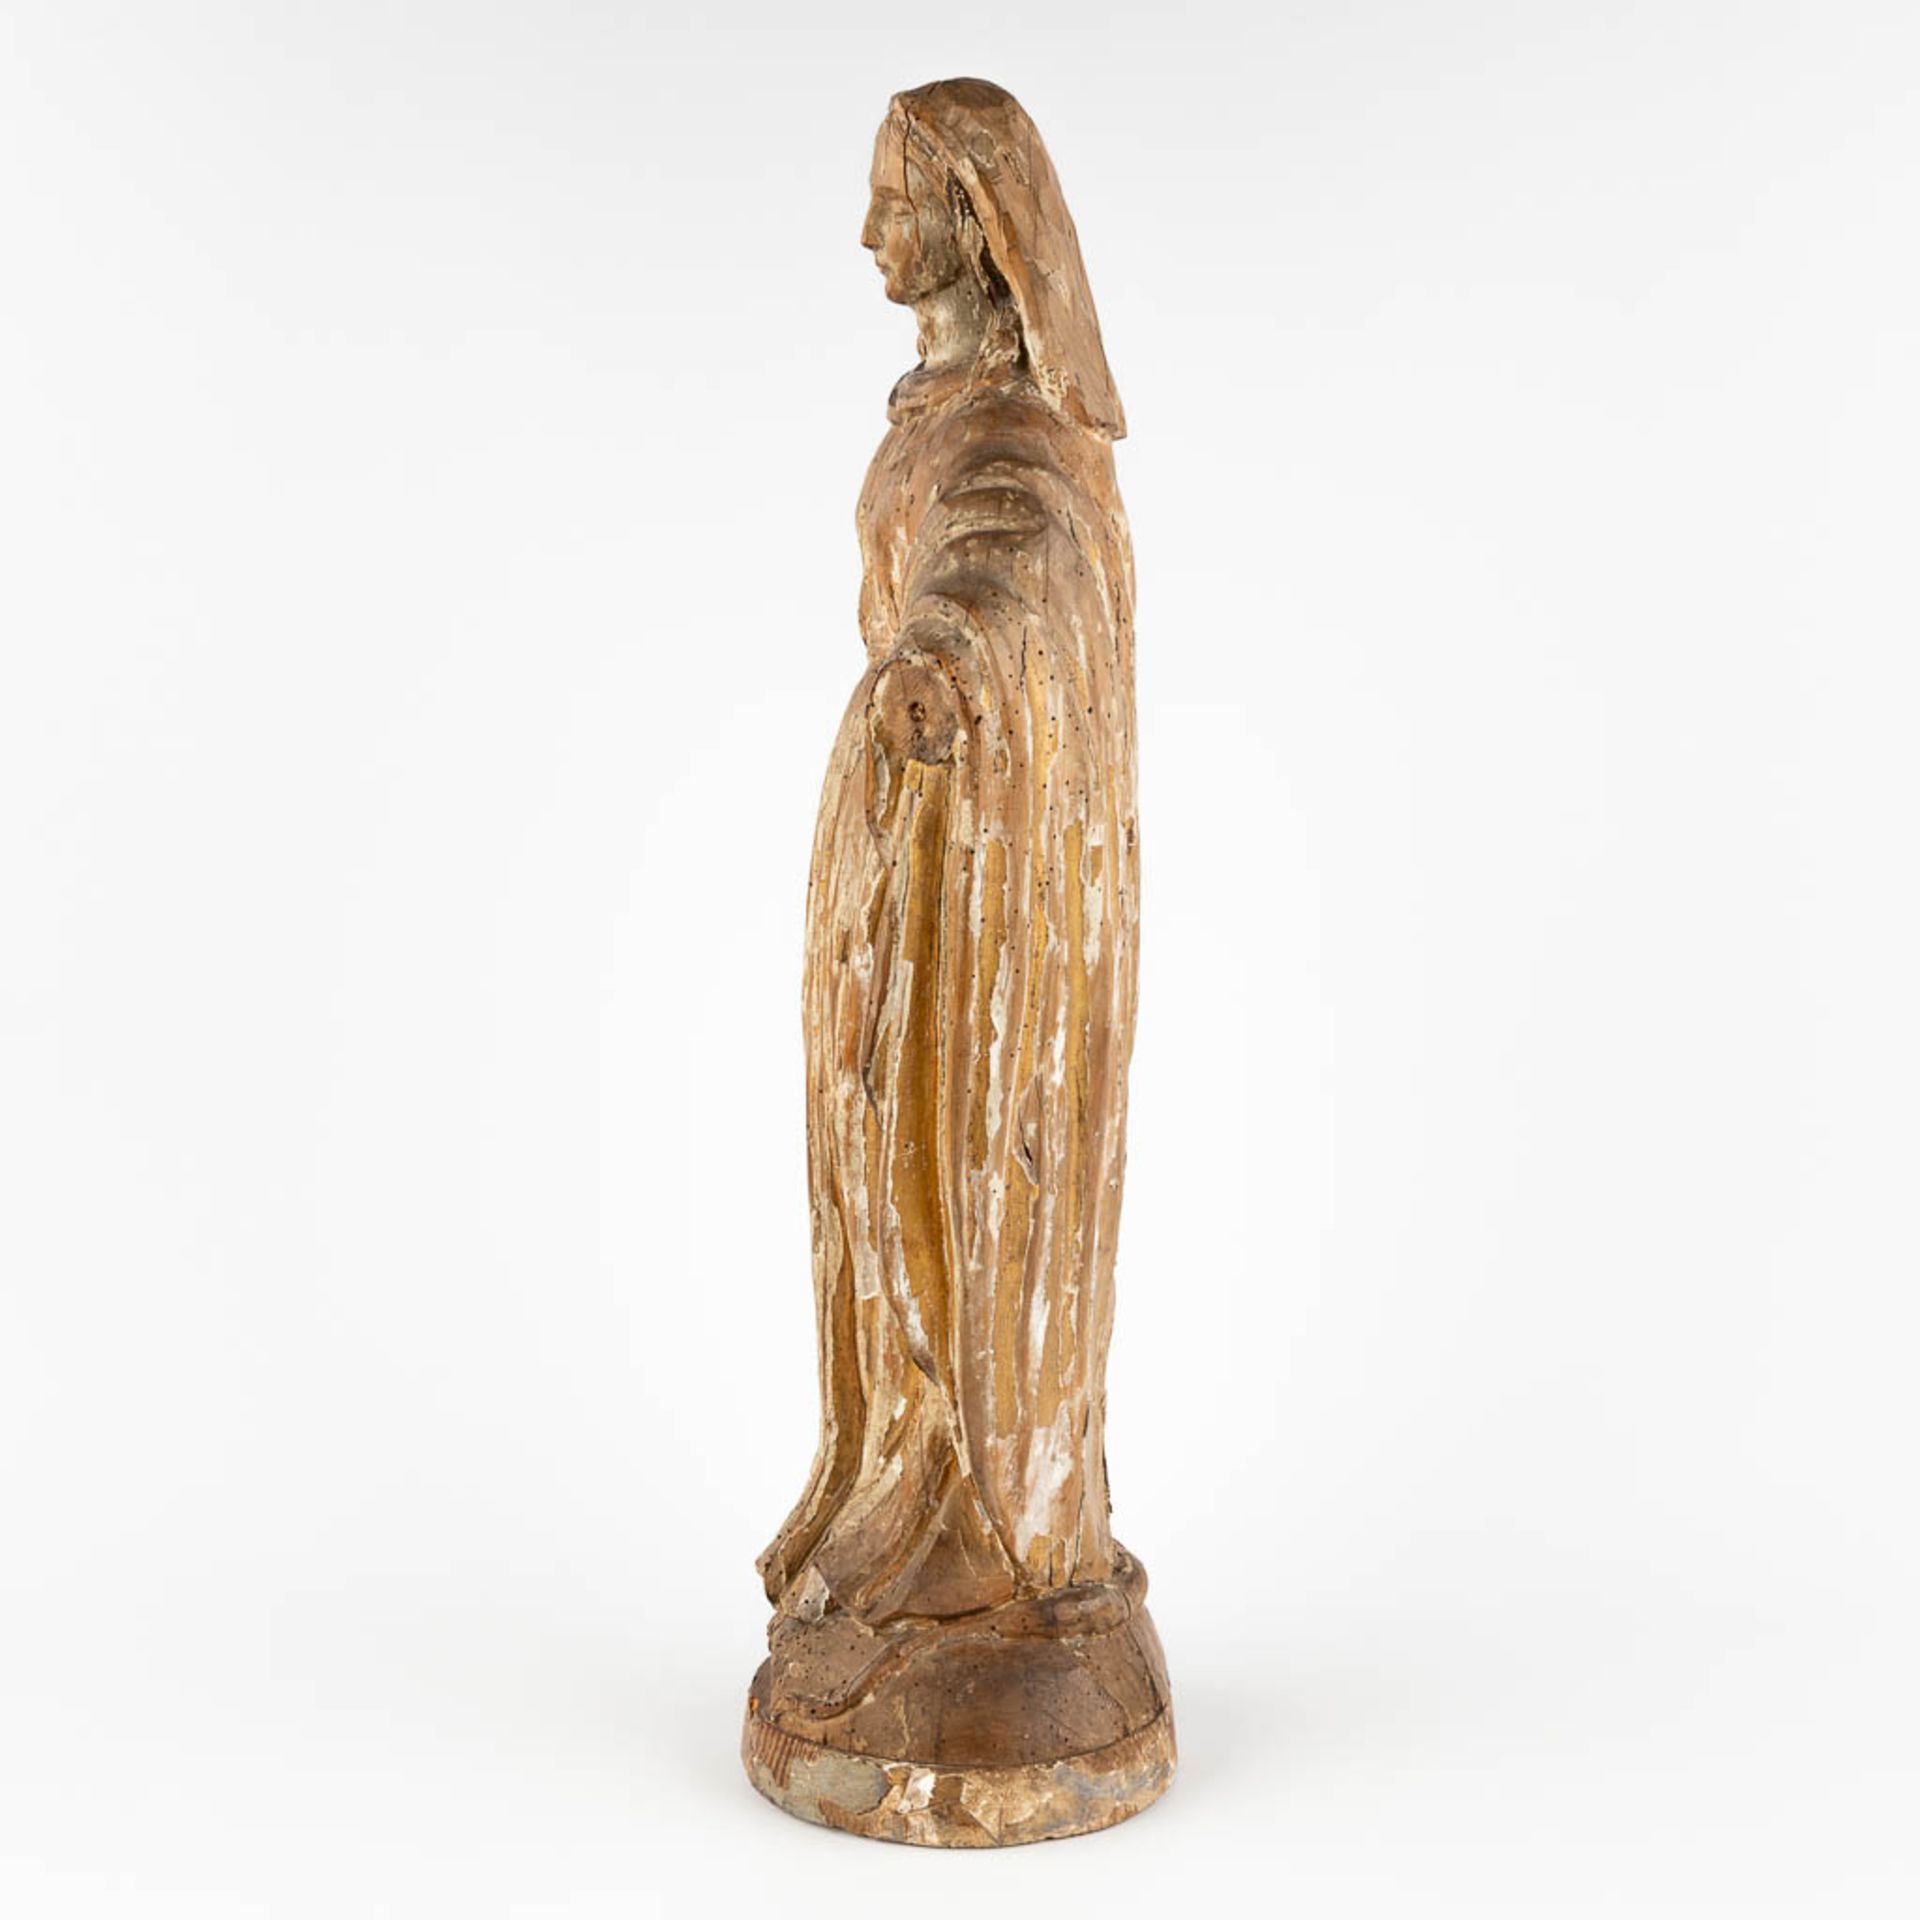 A wood-sculptured Madonna, remains of the original patina. 18th C. (D:15 x W:26 x H:62 cm) - Image 6 of 14